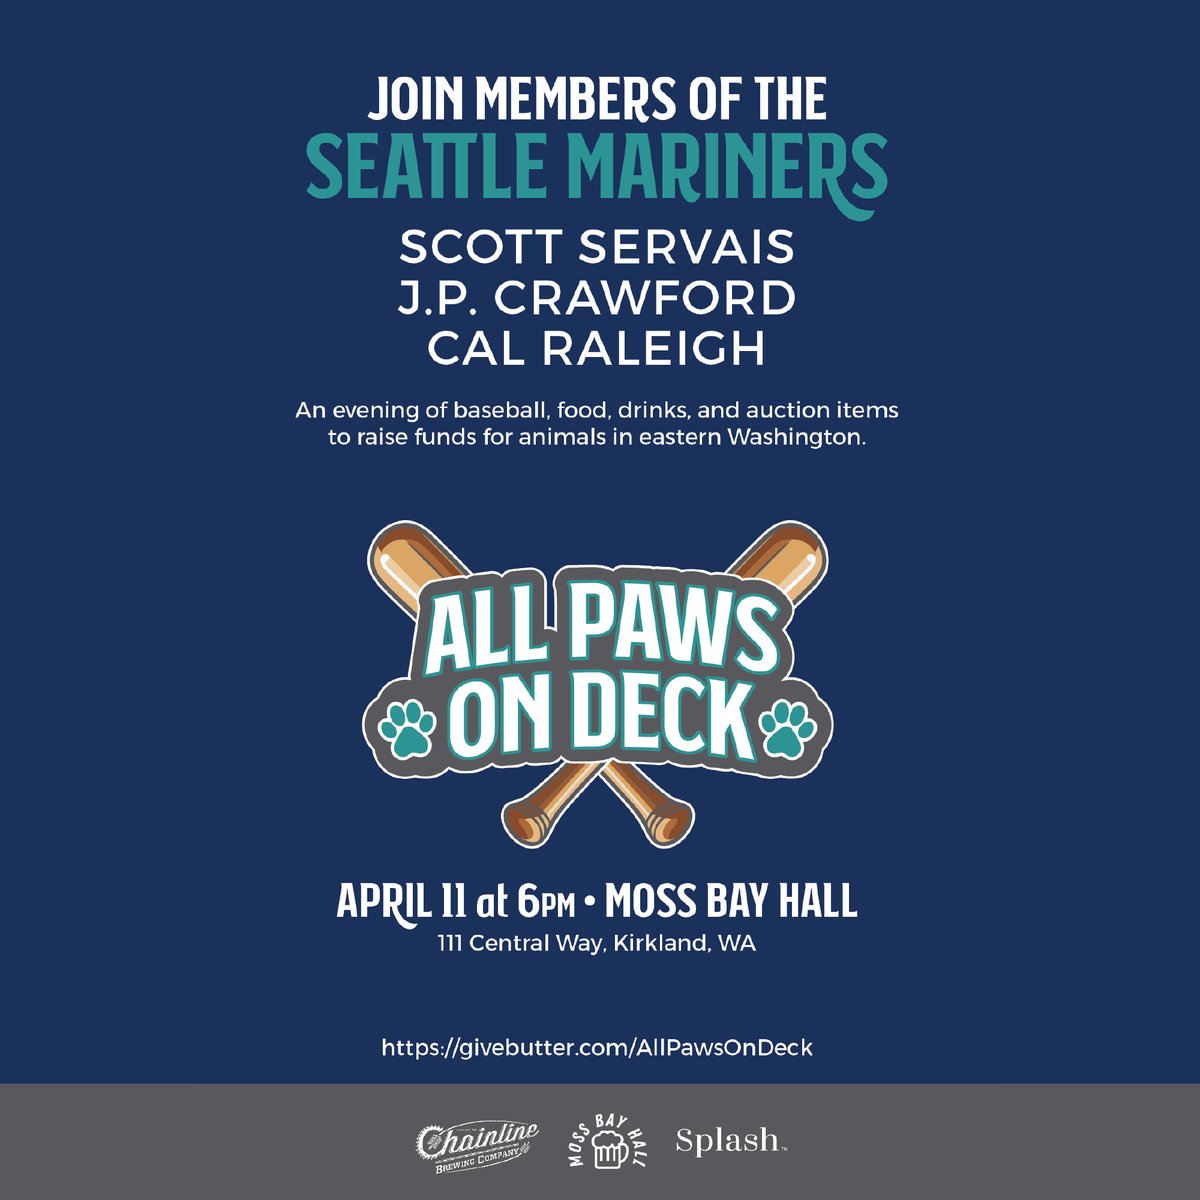 All Paws On Deck 🐾 Join the Servais family, @jp_crawford and Cal Raleigh as they team up with Team Okanogan Animal Rescue to bring awareness and solutions to the overpopulation of cats and dogs in our state on April 11. Learn more at givebutter.com/AllPawsOnDeck